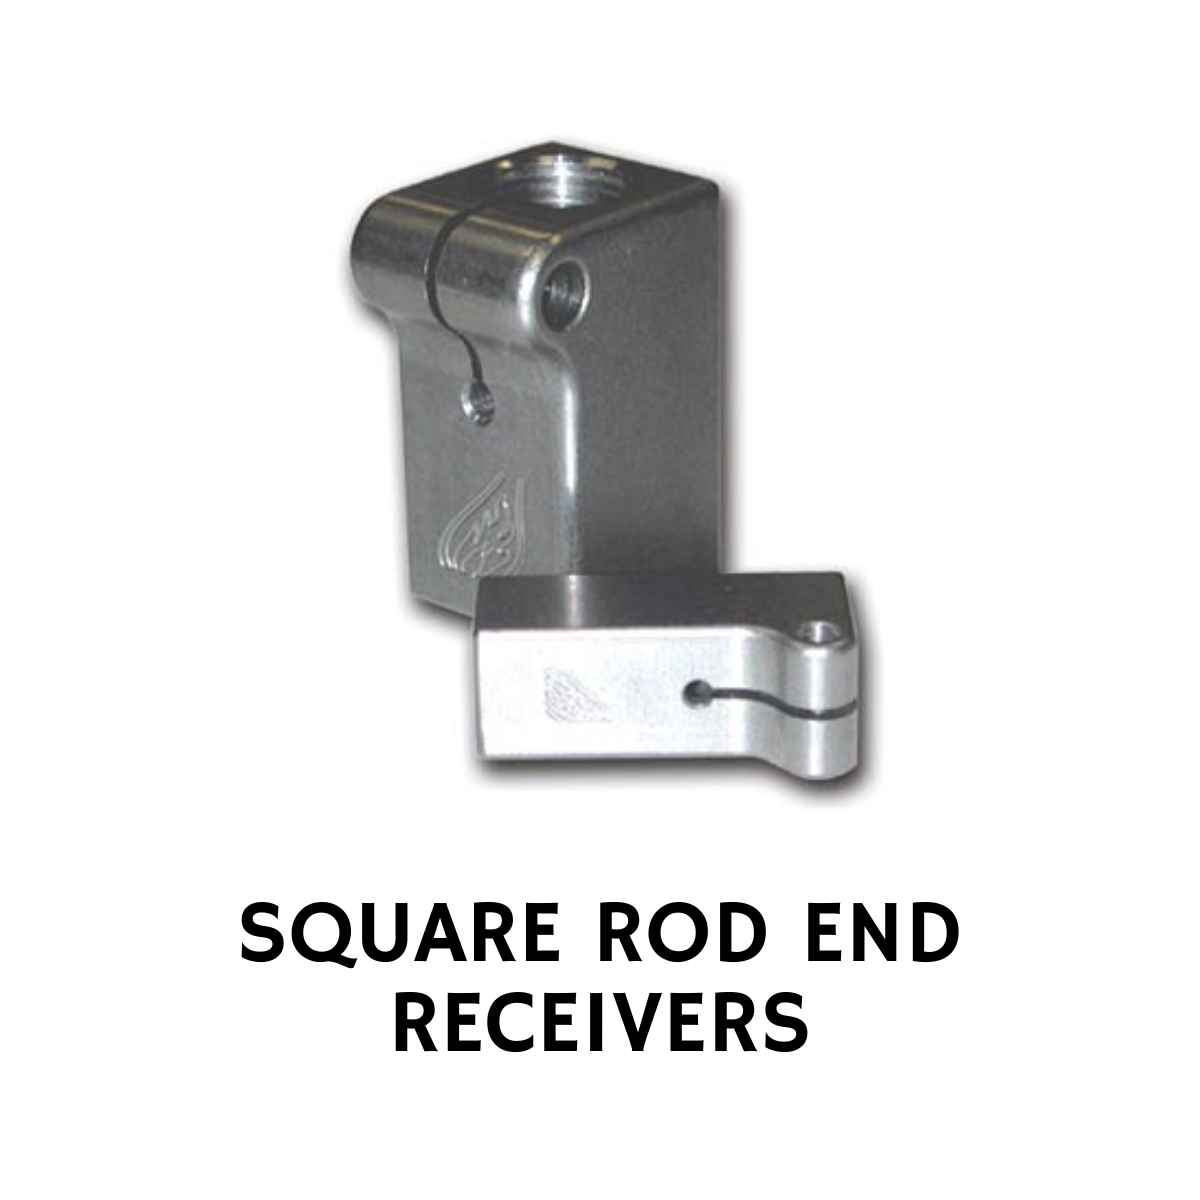 SQUARE ROD END RECEIVERS